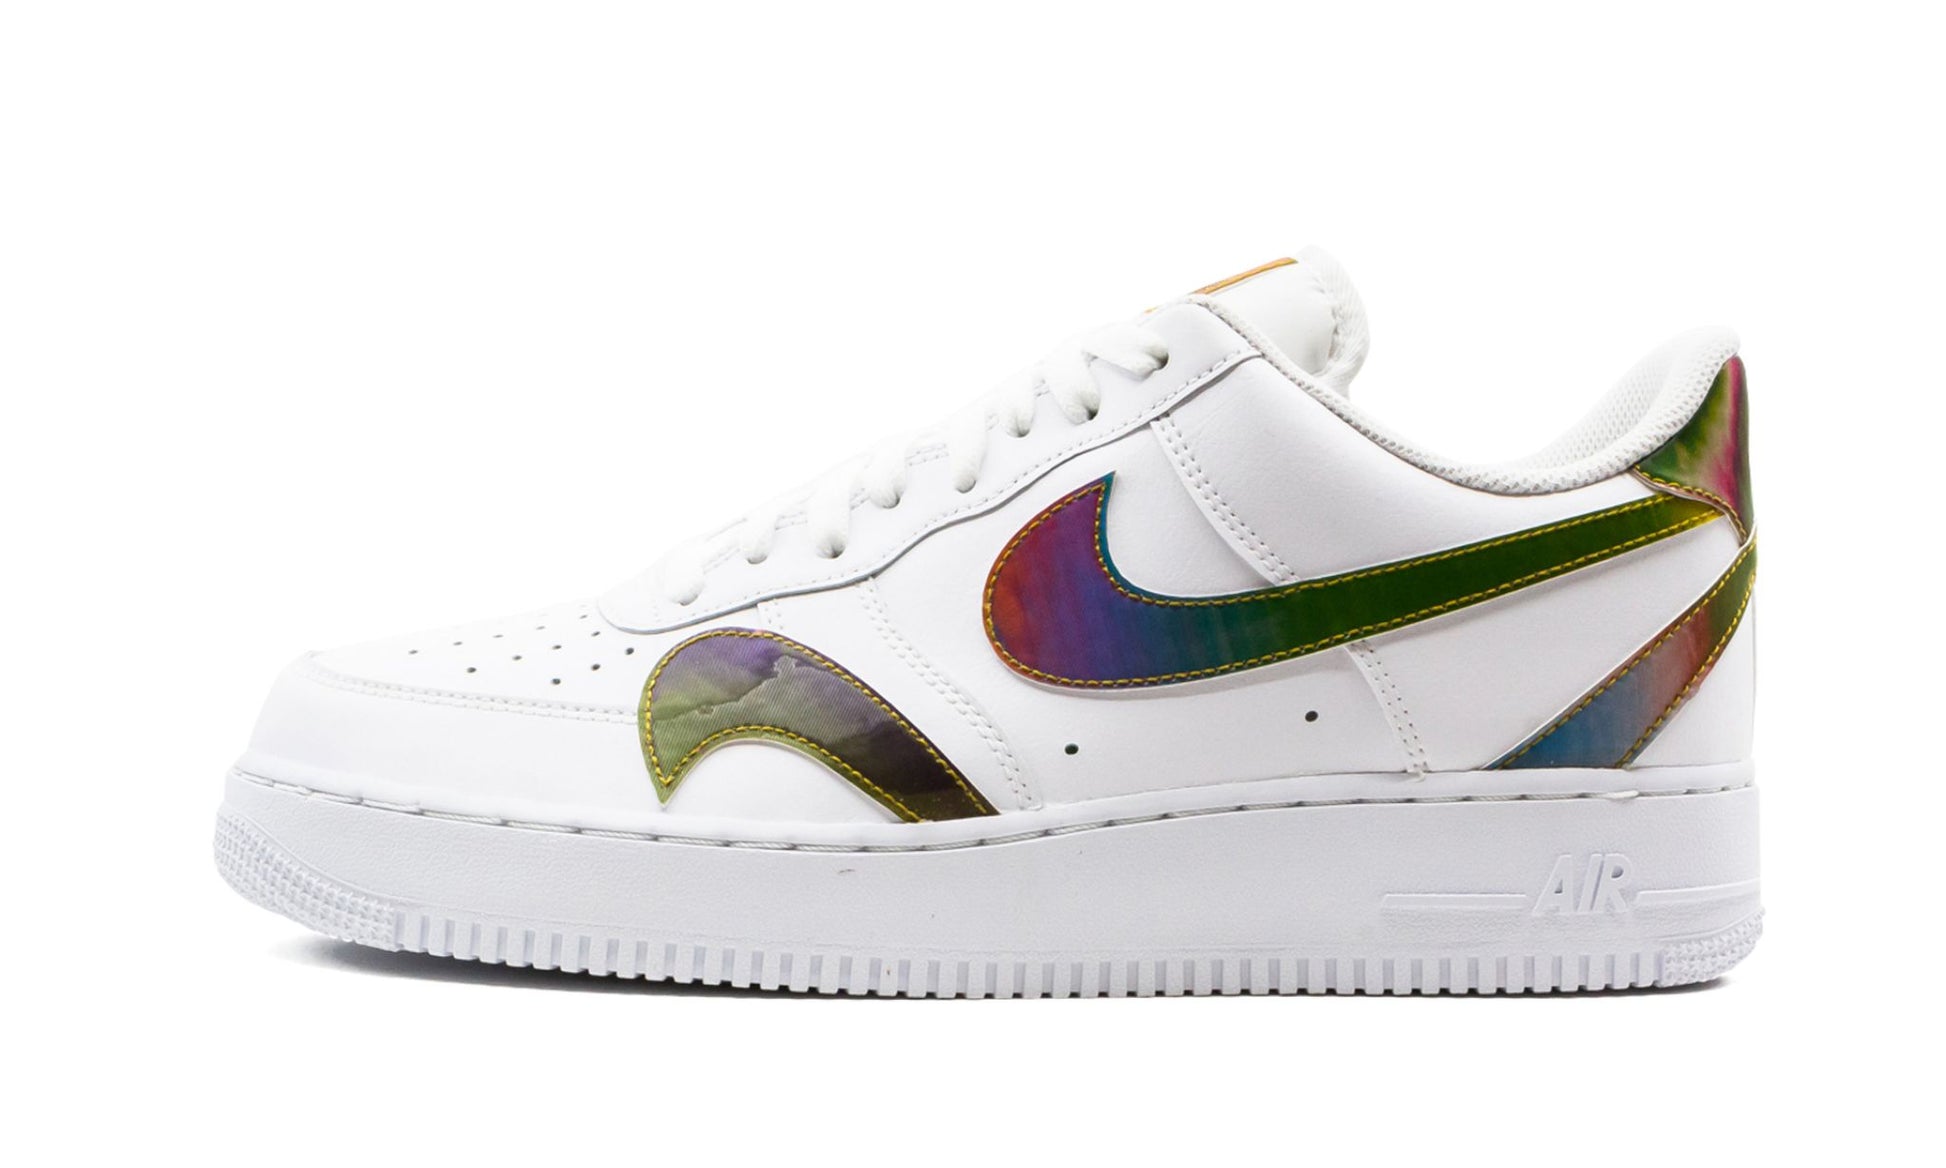 Air Force 1 '07 LV8 "Misplaced Swoosh"